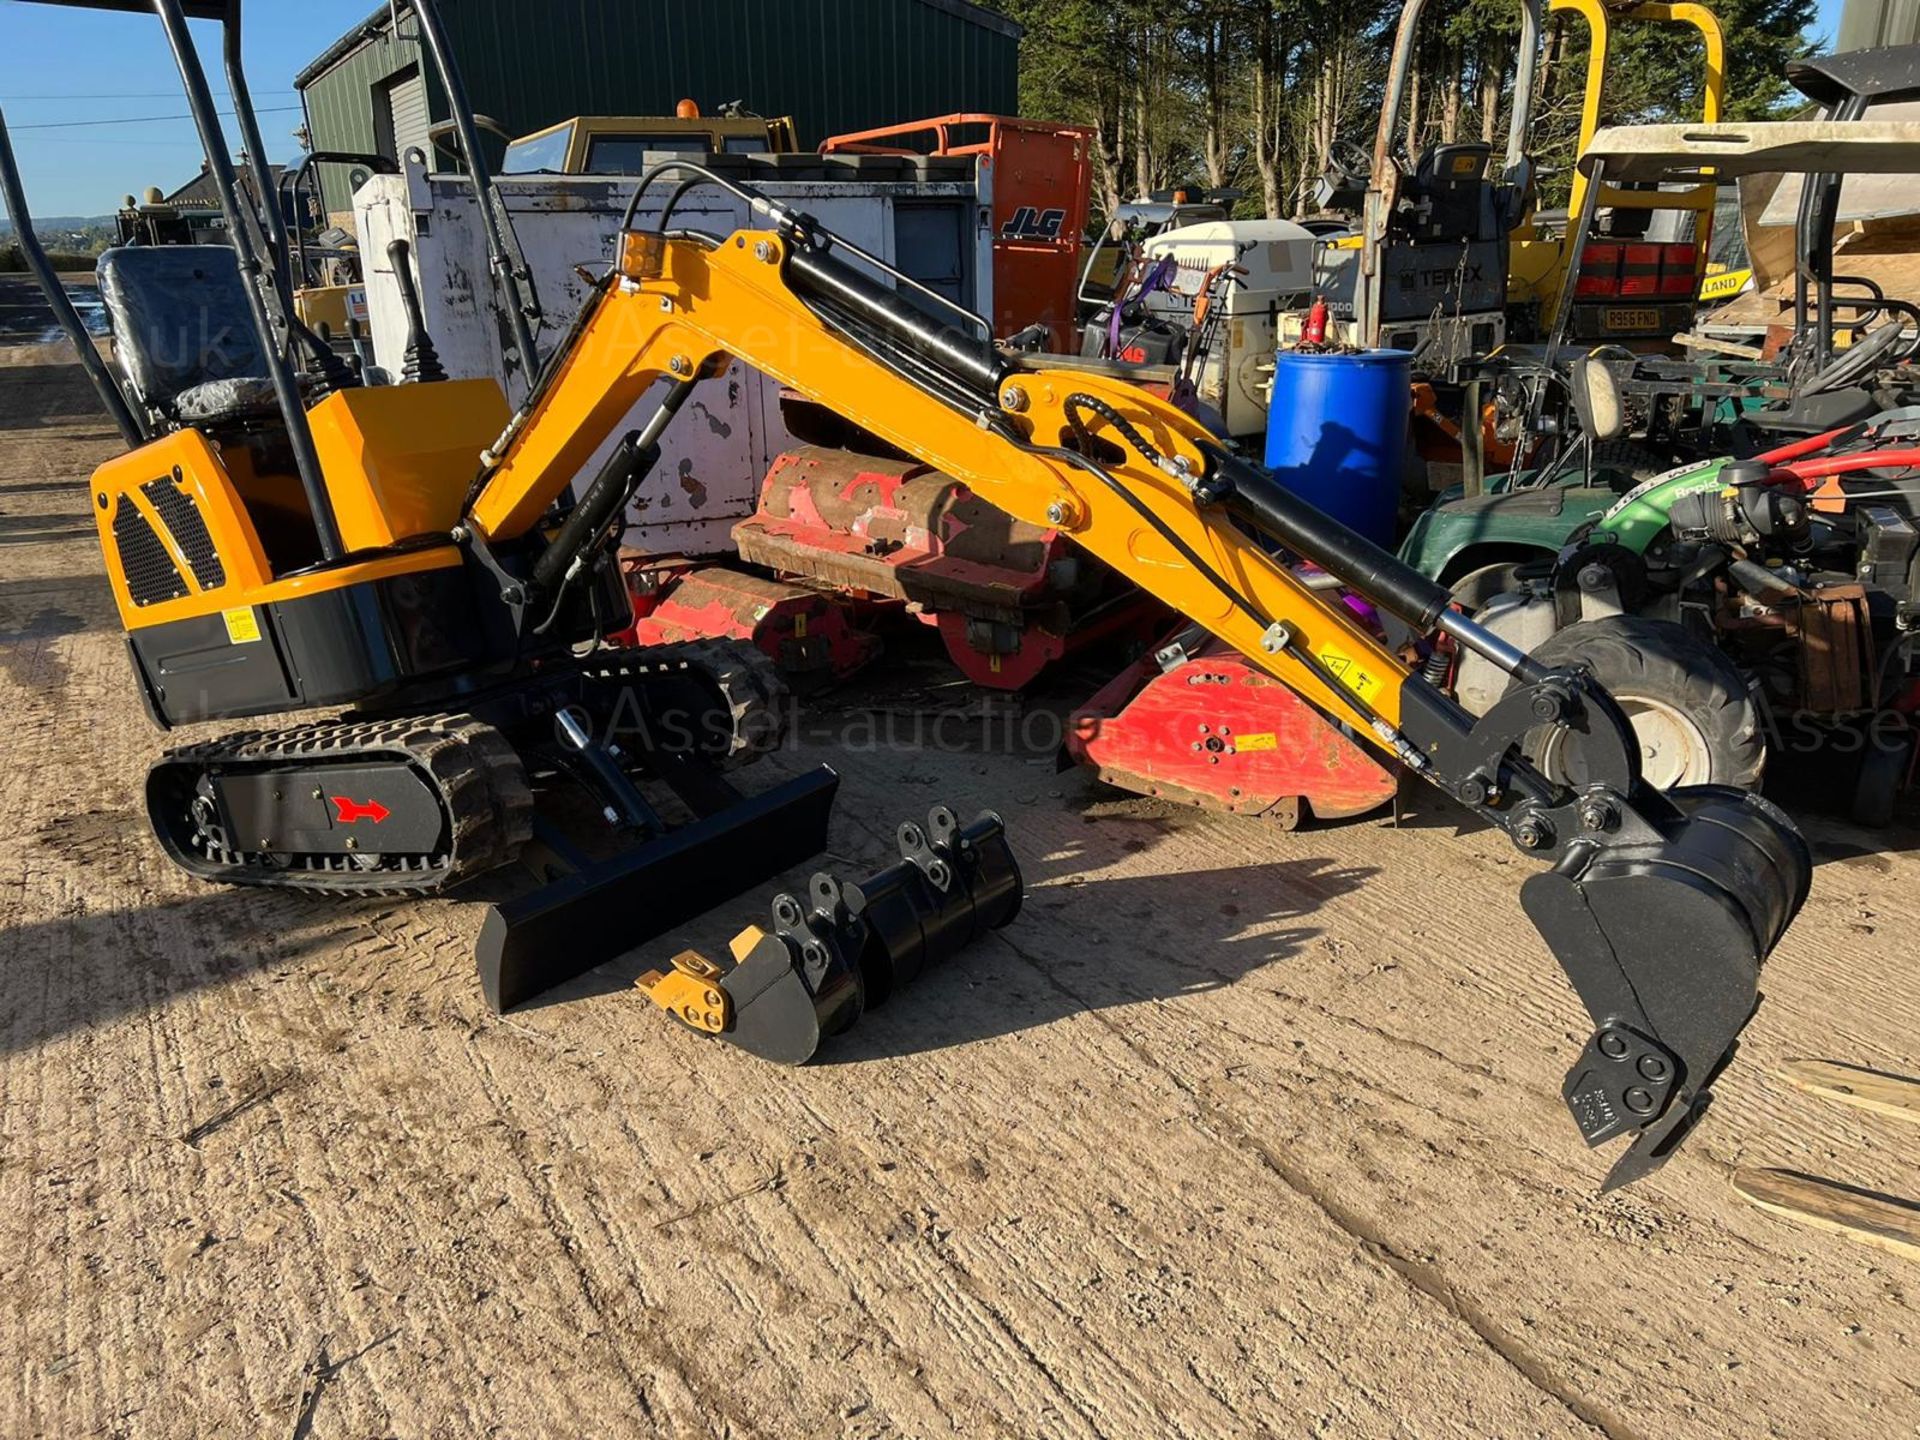 NEW AND UNUSED LM10 YELLOW AND BLACK 1 TON MINI DIGGER, RUNS DRIVES AND DIGS, 3 BUCKETS *PLUS VAT* - Image 14 of 14